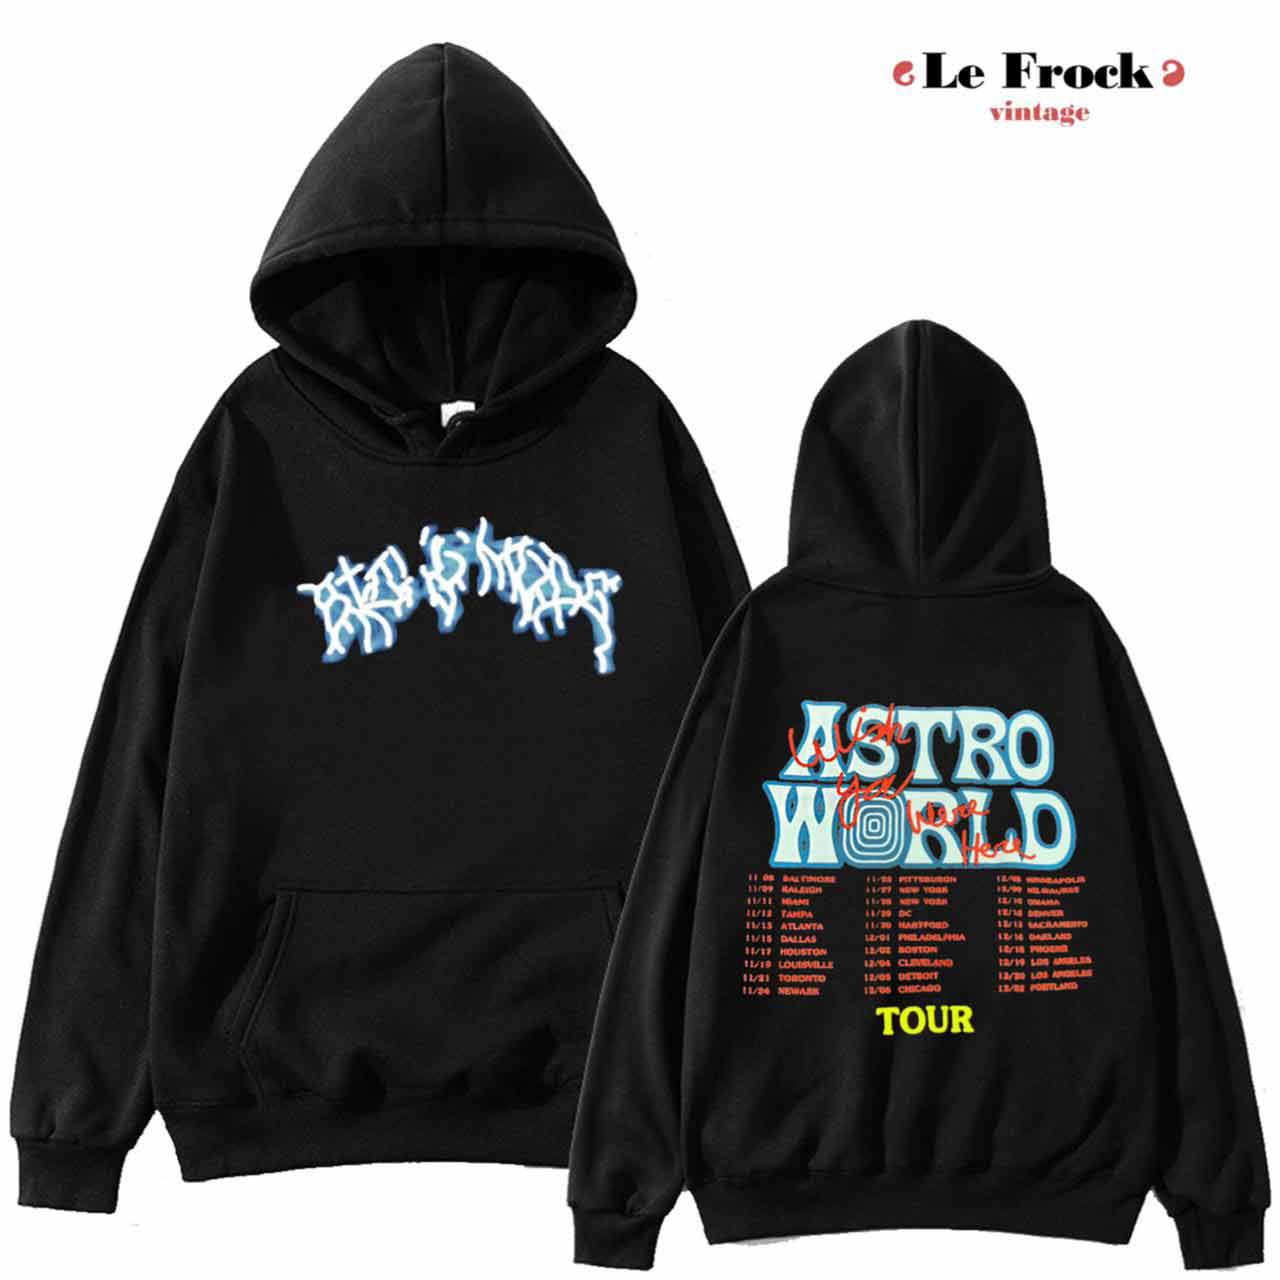 Wish You Were Here Astroworld Tour Hoodie